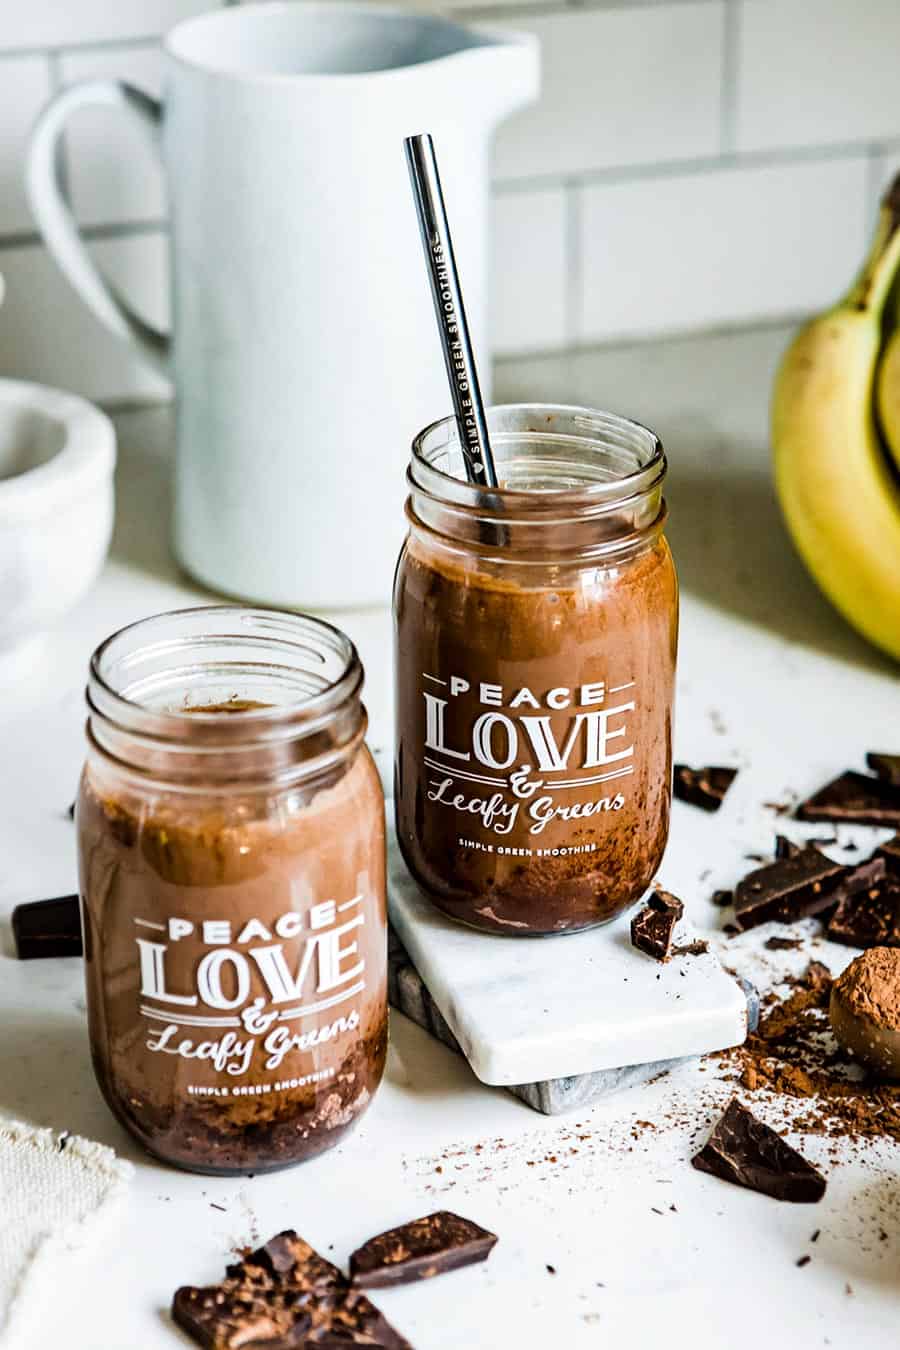 2 jars of chocolate peanut butter smoothie with straws. Jars have white writing that says Peace, Love & Leafy Greens Simple Green Smoothies.